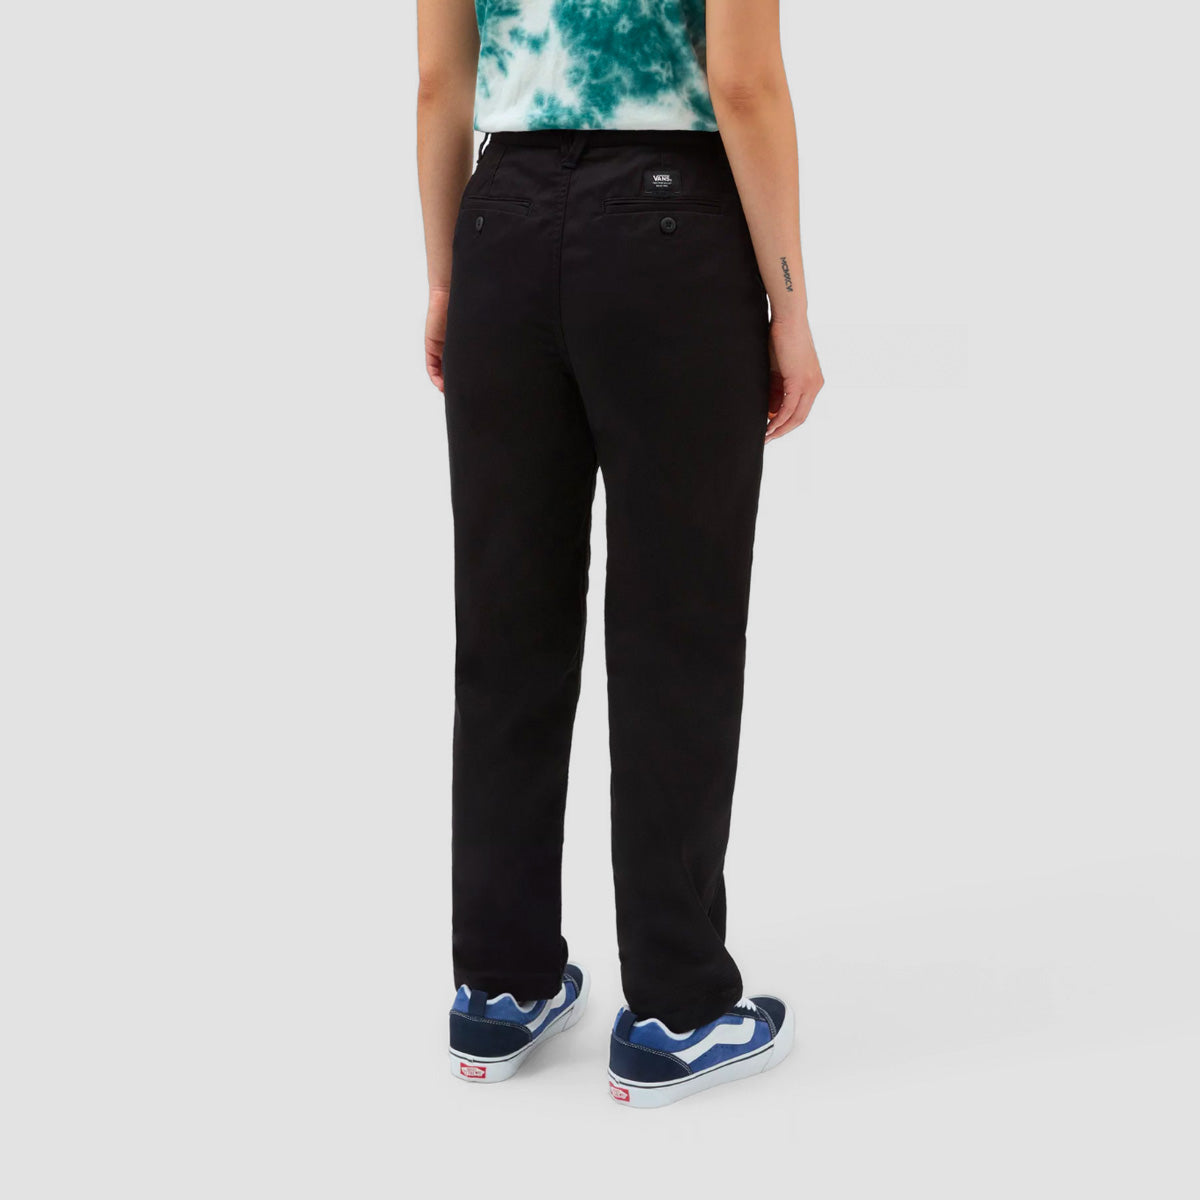 Vans Relaxed Authentic Chino Pants Black - Womens